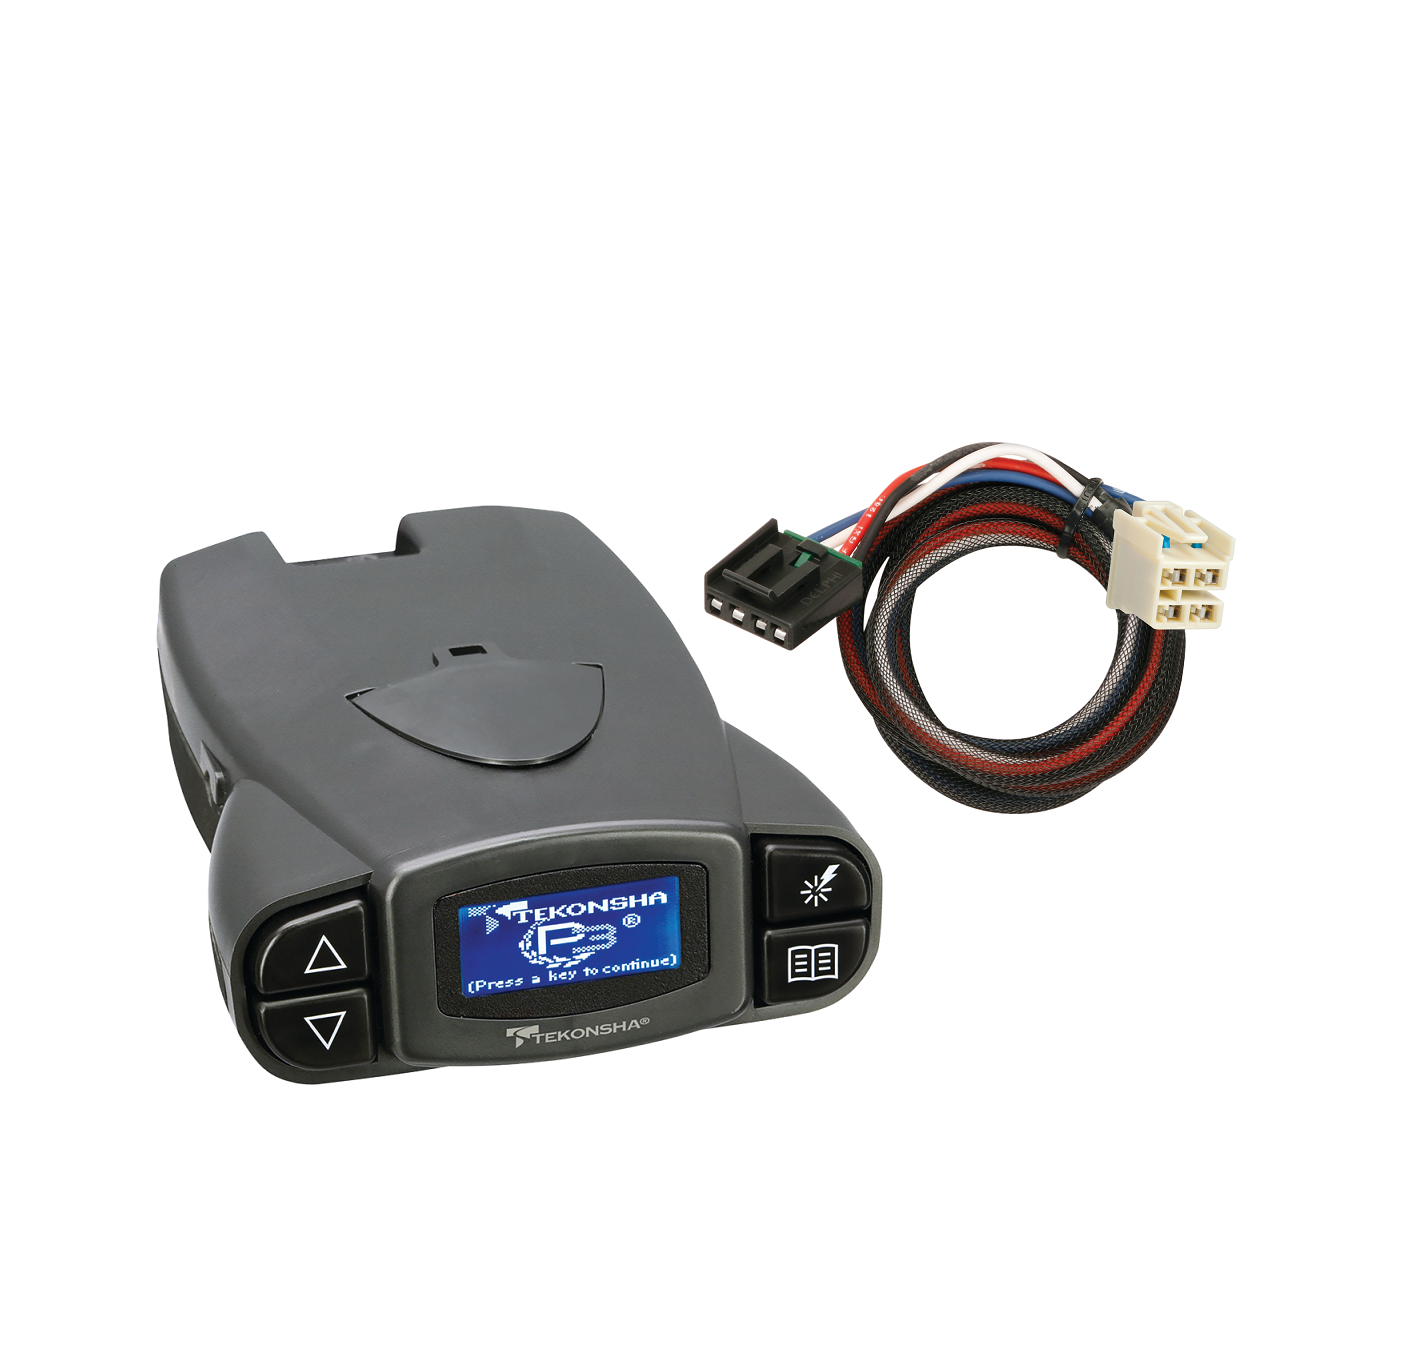 2014-2019 GMC Sierra 1500 3016 Tekonsha Prodigy P3 Proportional Brake Controller for Trailers with 1-4 Axles 90195 w/ Plug-N-Play Wire